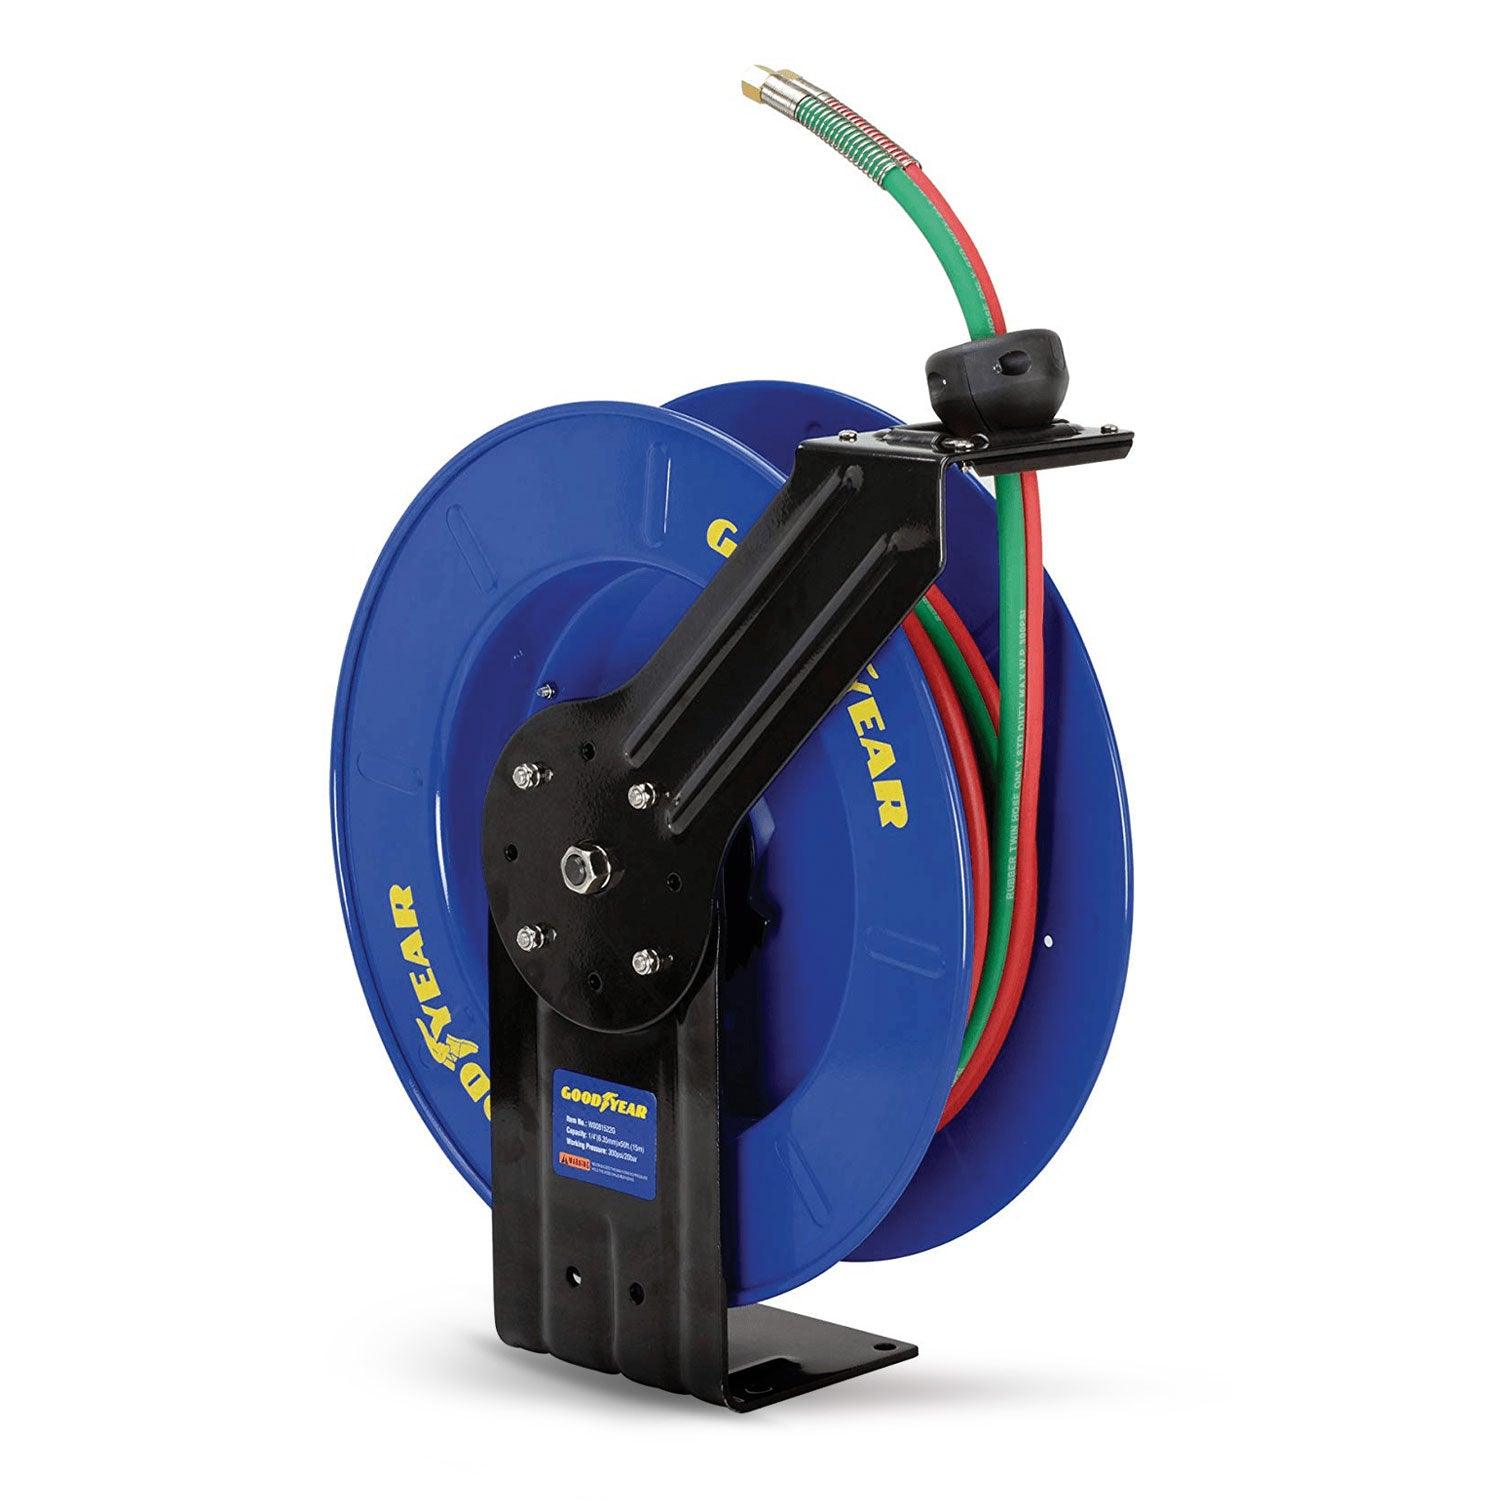 Goodyear Oxy-Acetylene Welding Hose Reel - Twin 1/4" x 50' Ft Hoses, Max 300 PSI, 1/4" MNPT Connections - DIY Tools by GreatCircleUS